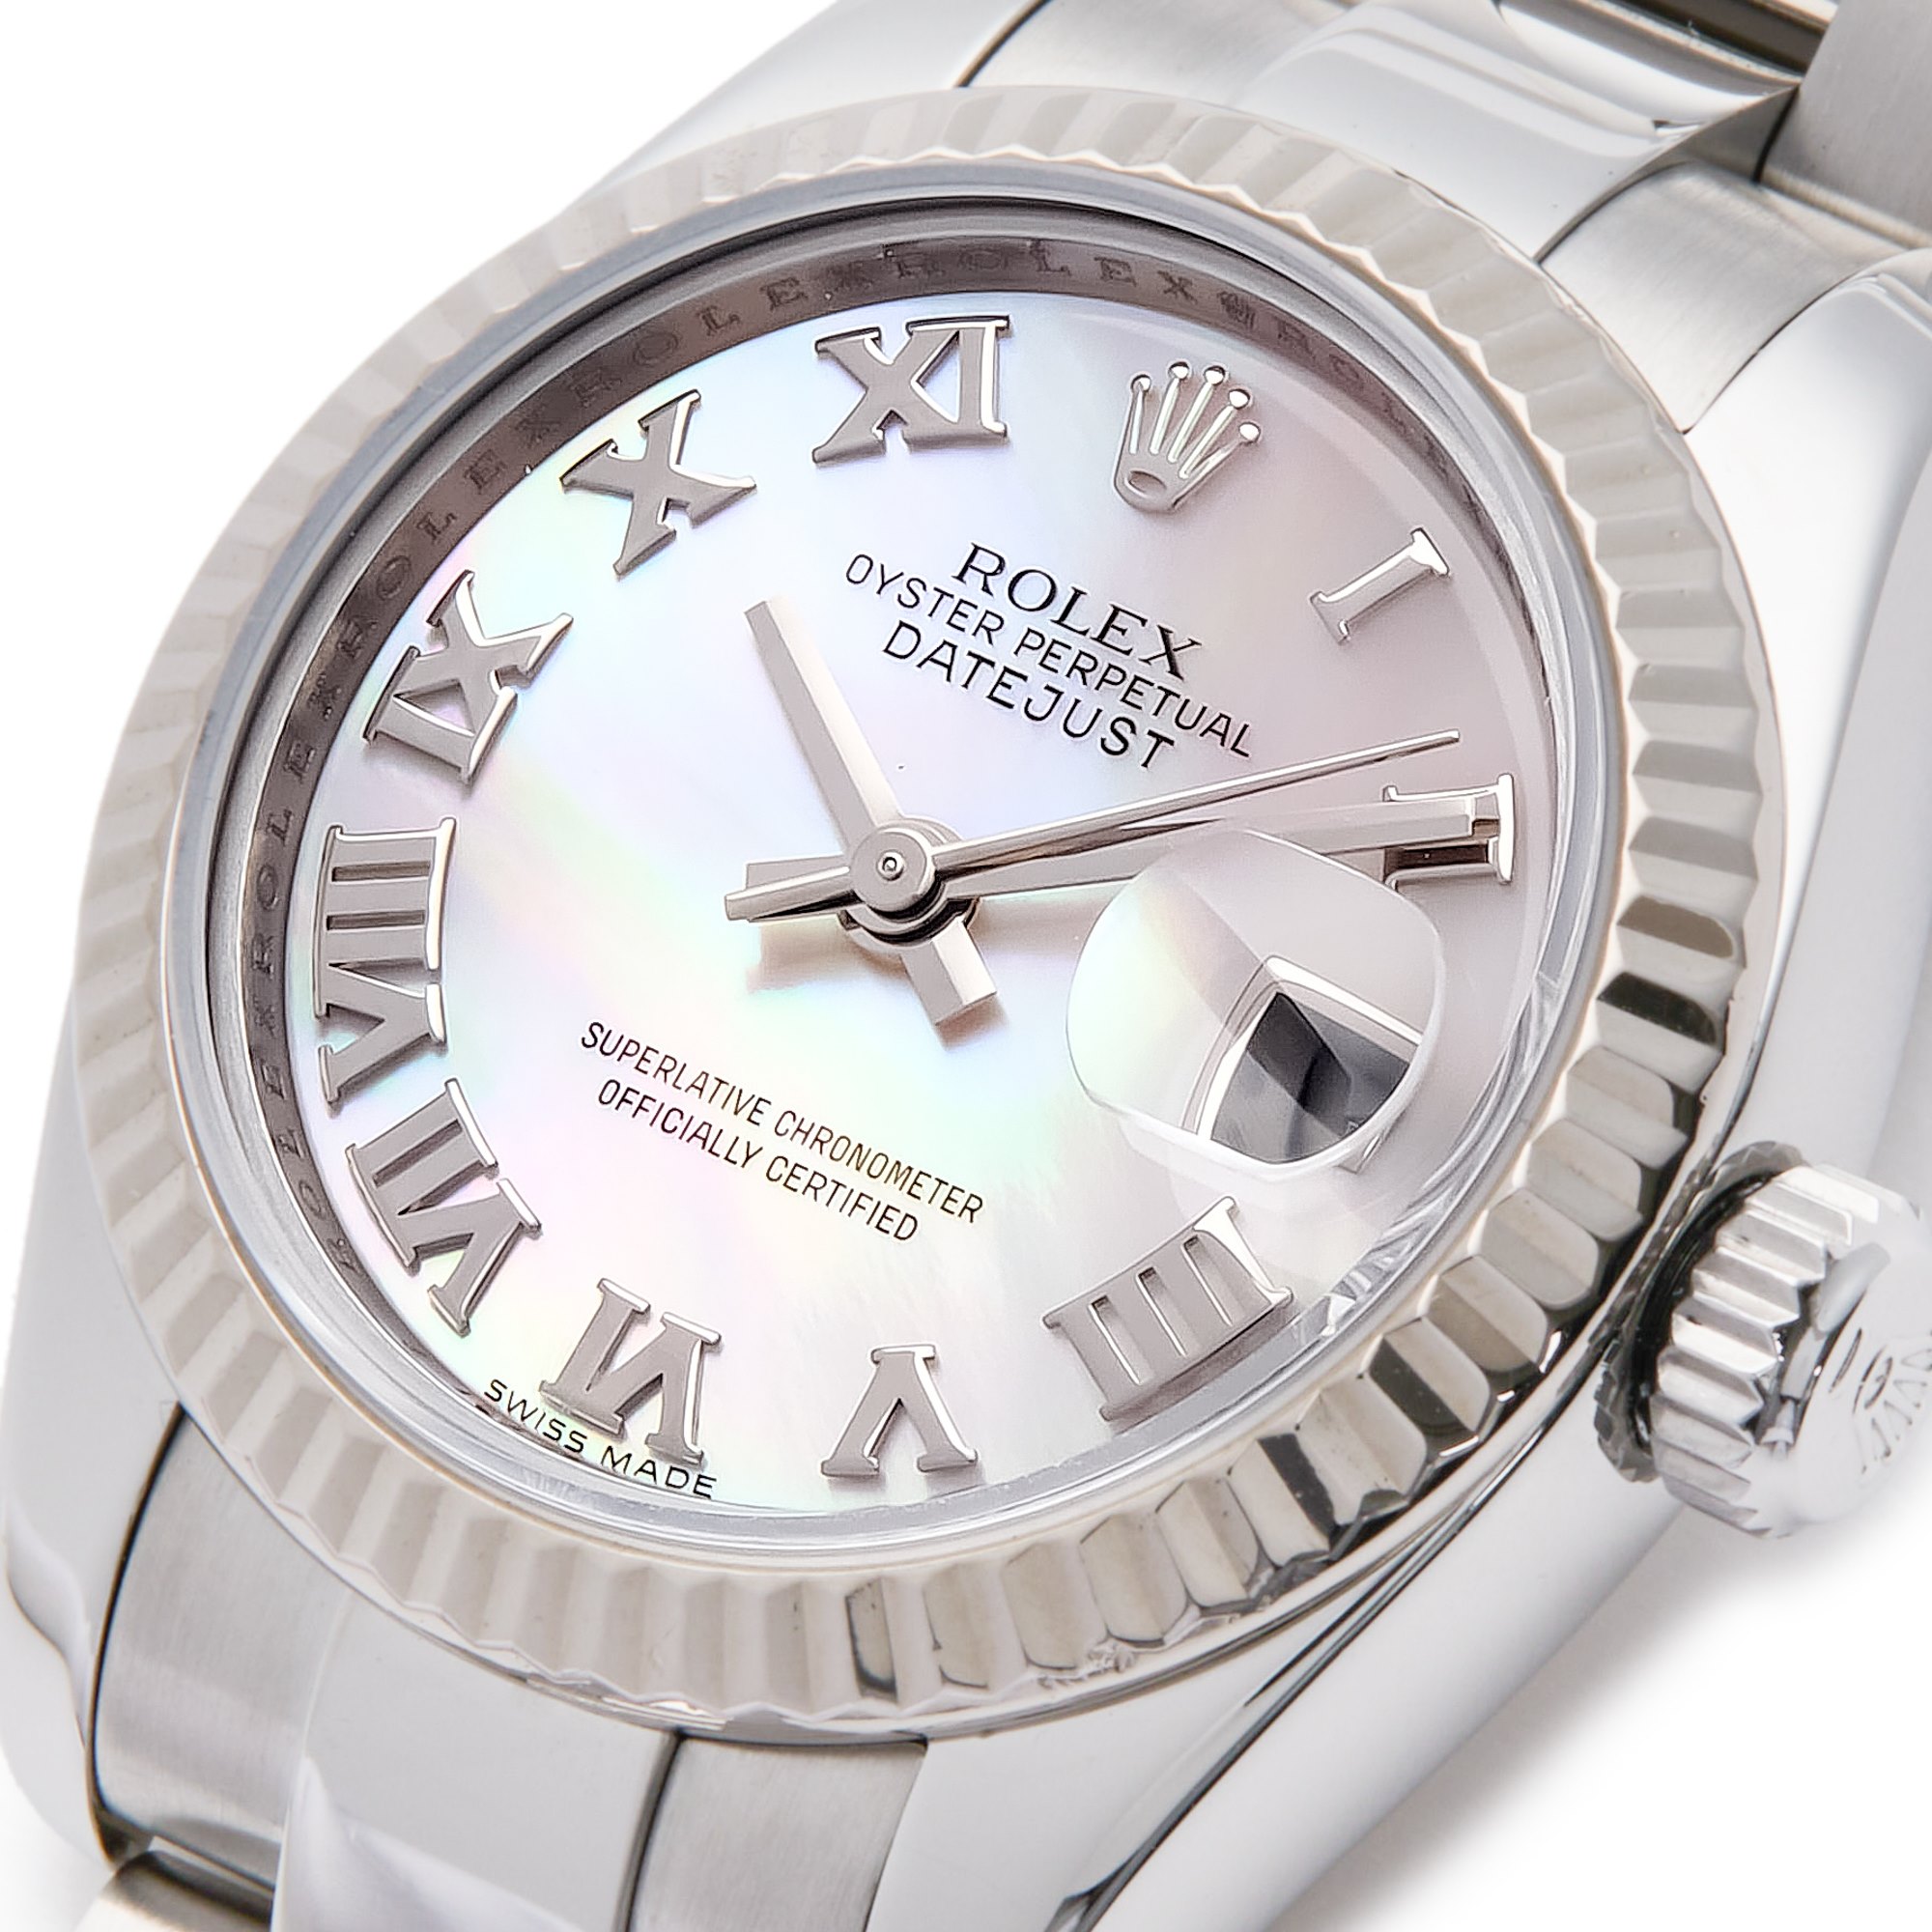 Rolex Datejust 26 Mother of Pearl Roestvrij Staal 179174